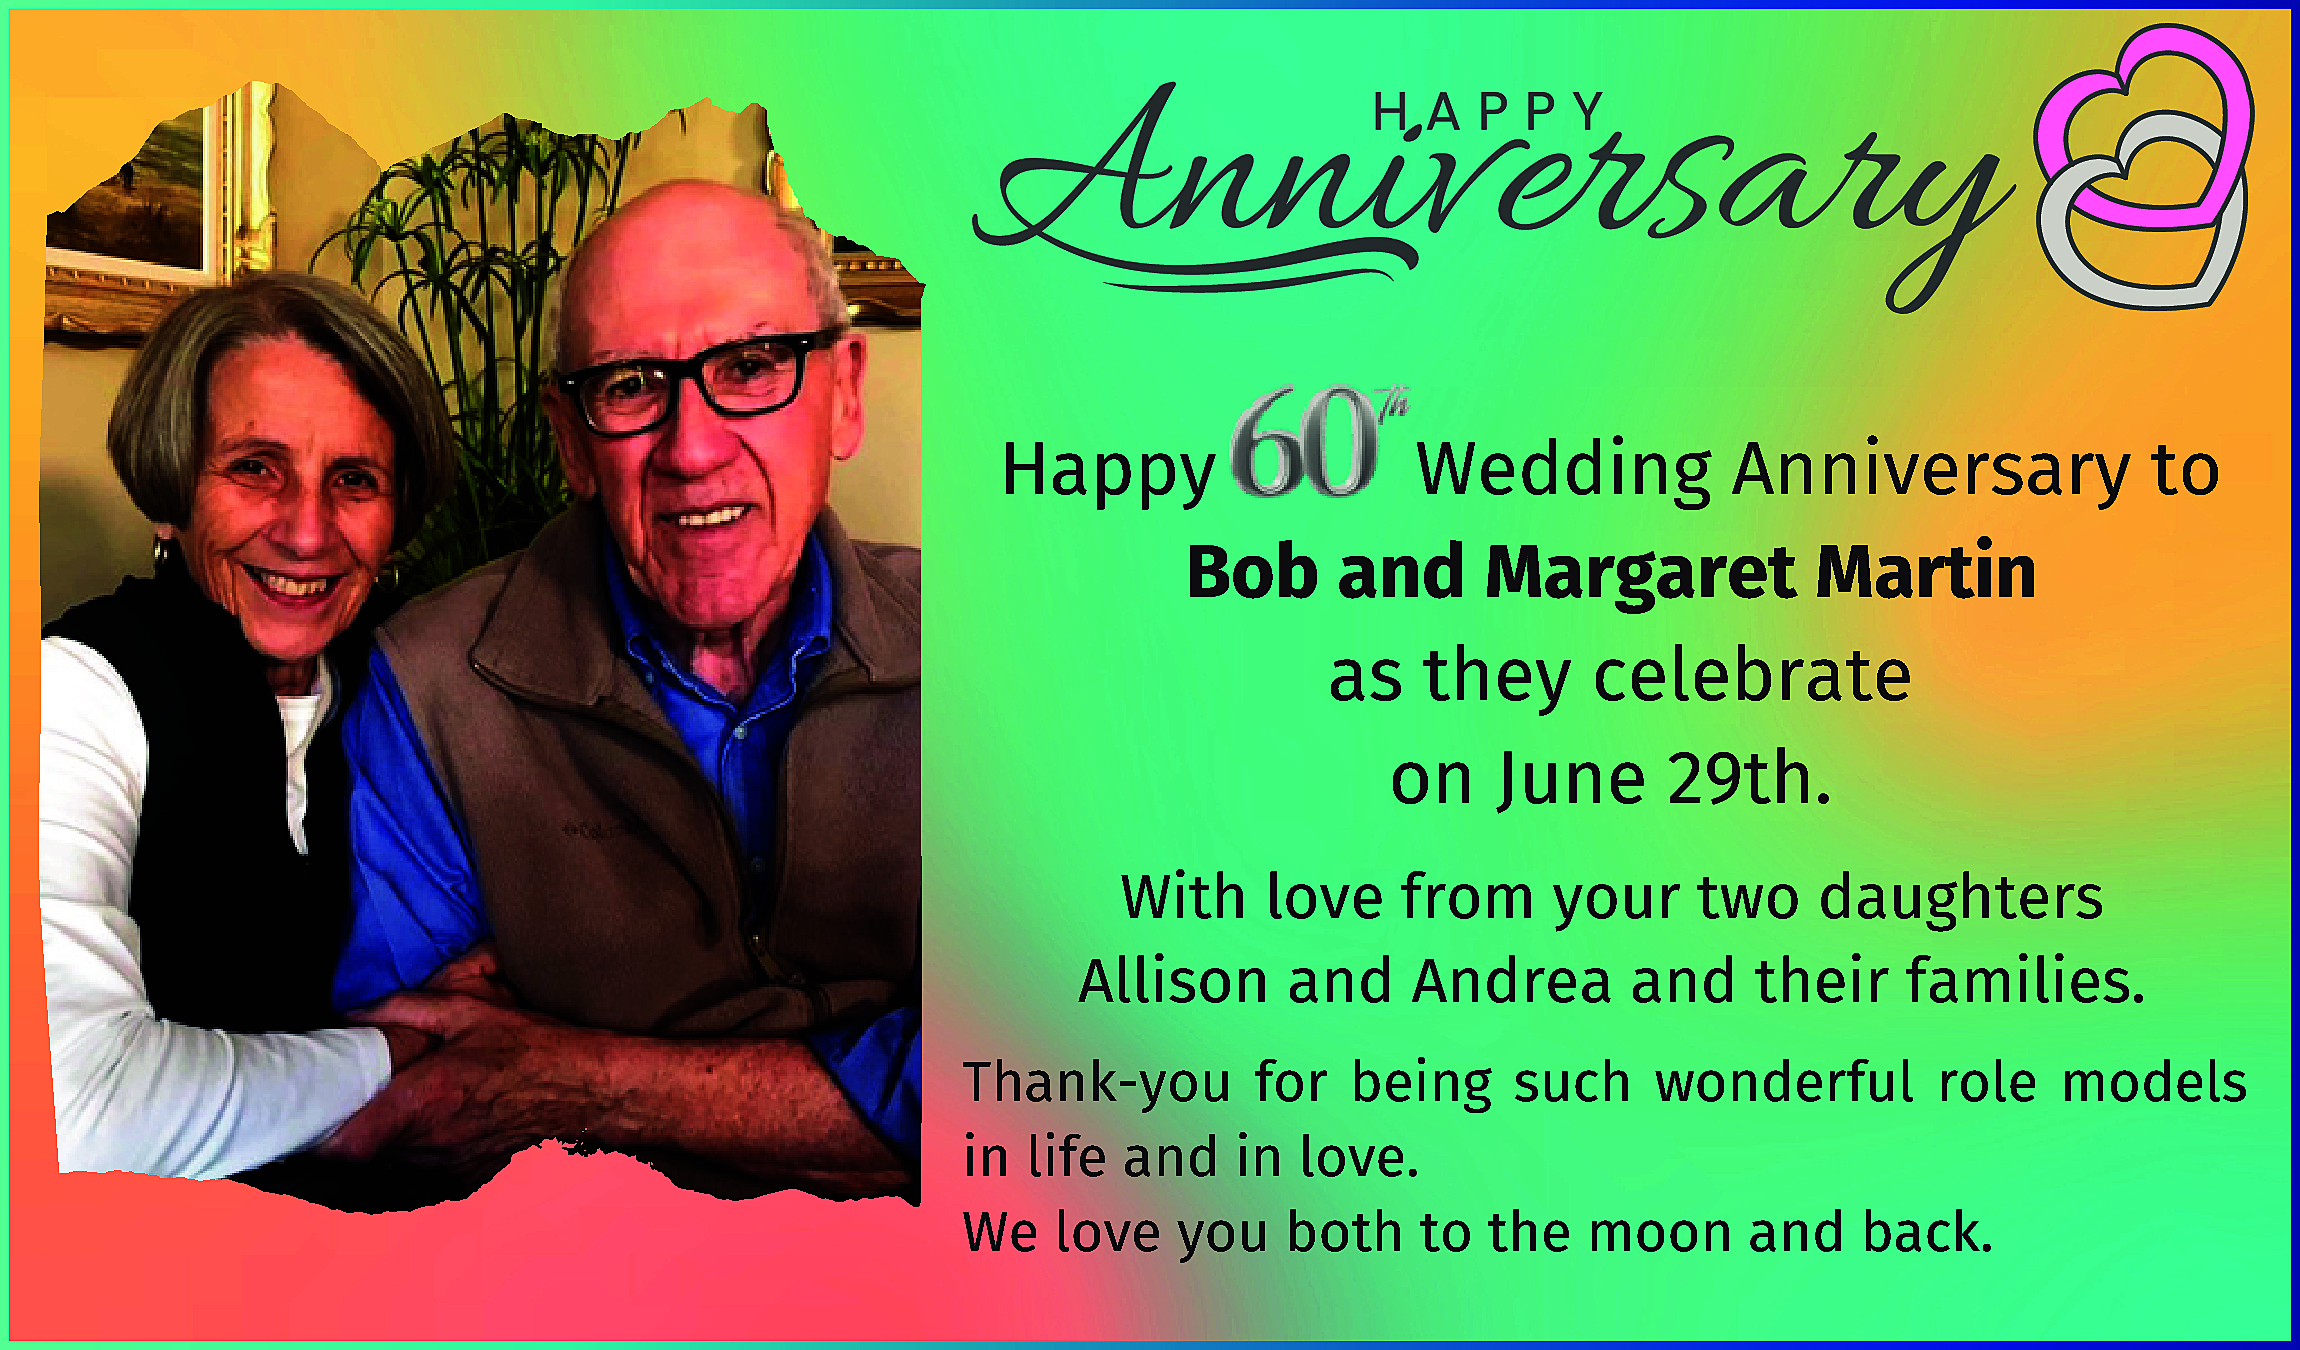 Happy <br>Wedding Anniversary to <br>Bob  Happy  Wedding Anniversary to  Bob and Margaret Martin  as they celebrate  on June 29th.  With love from your two daughters  Allison and Andrea and their families.  Thank-you for being such wonderful role models  in life and in love.  We love you both to the moon and back.    